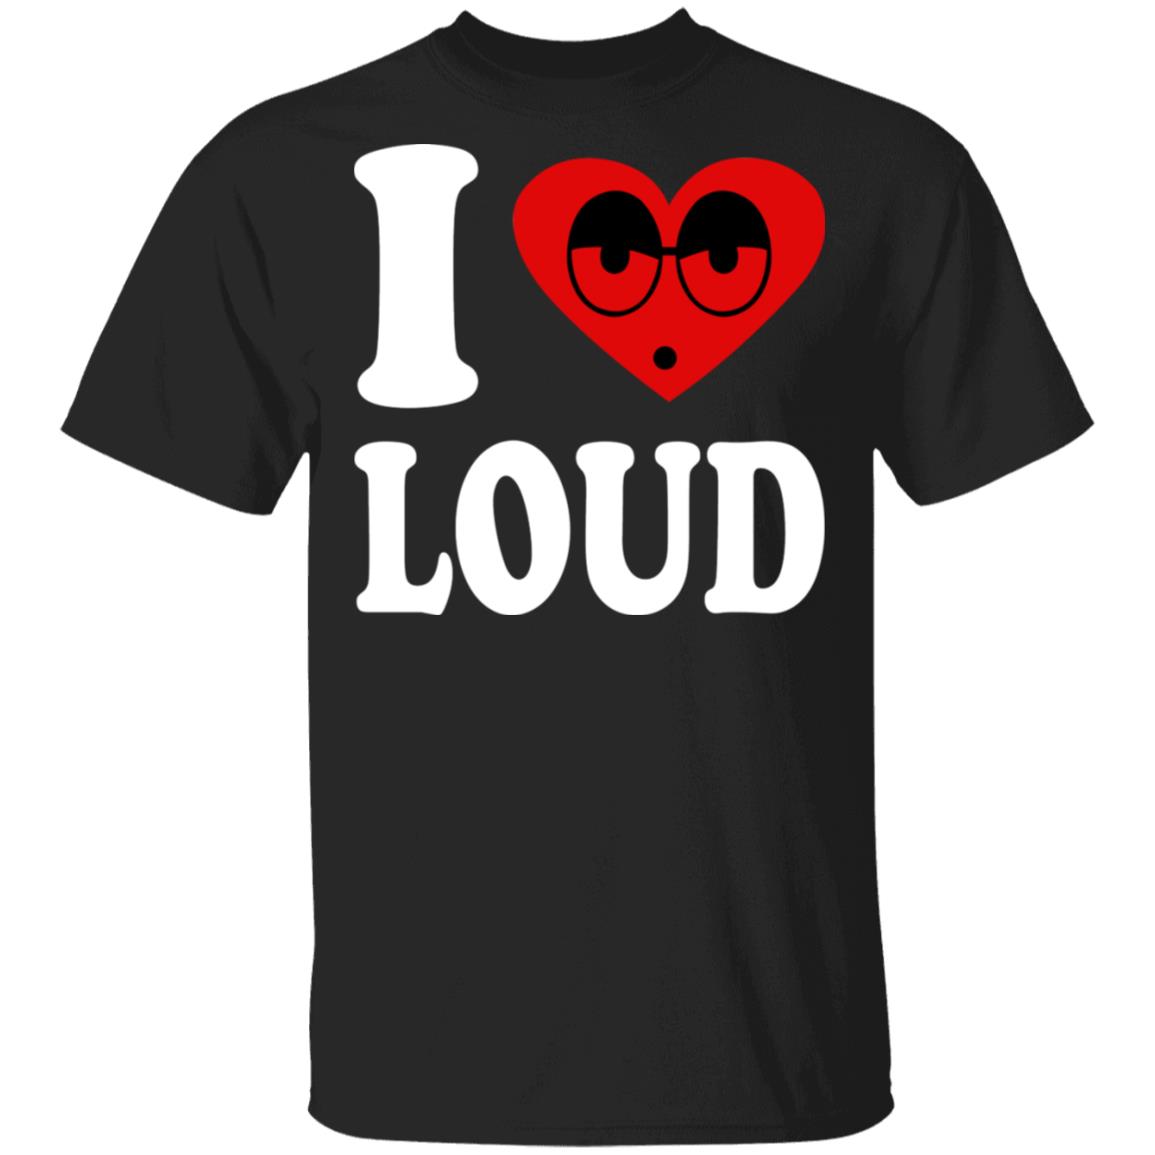 I Love Loud Shirt TeeMoonley Cool TShirts Online Store For Every